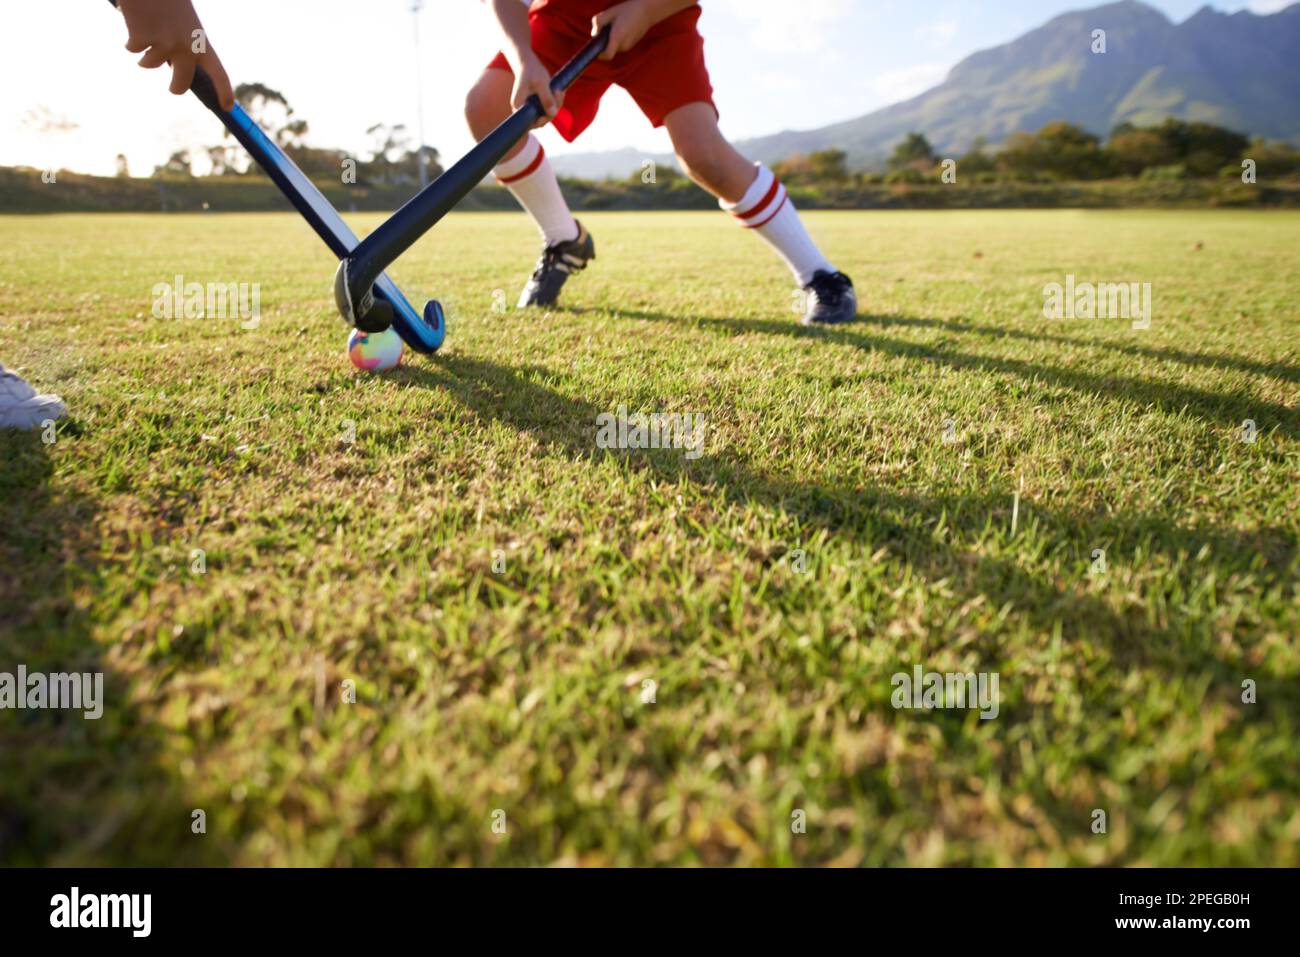 754 Field Hockey Kids Images, Stock Photos, 3D objects, & Vectors